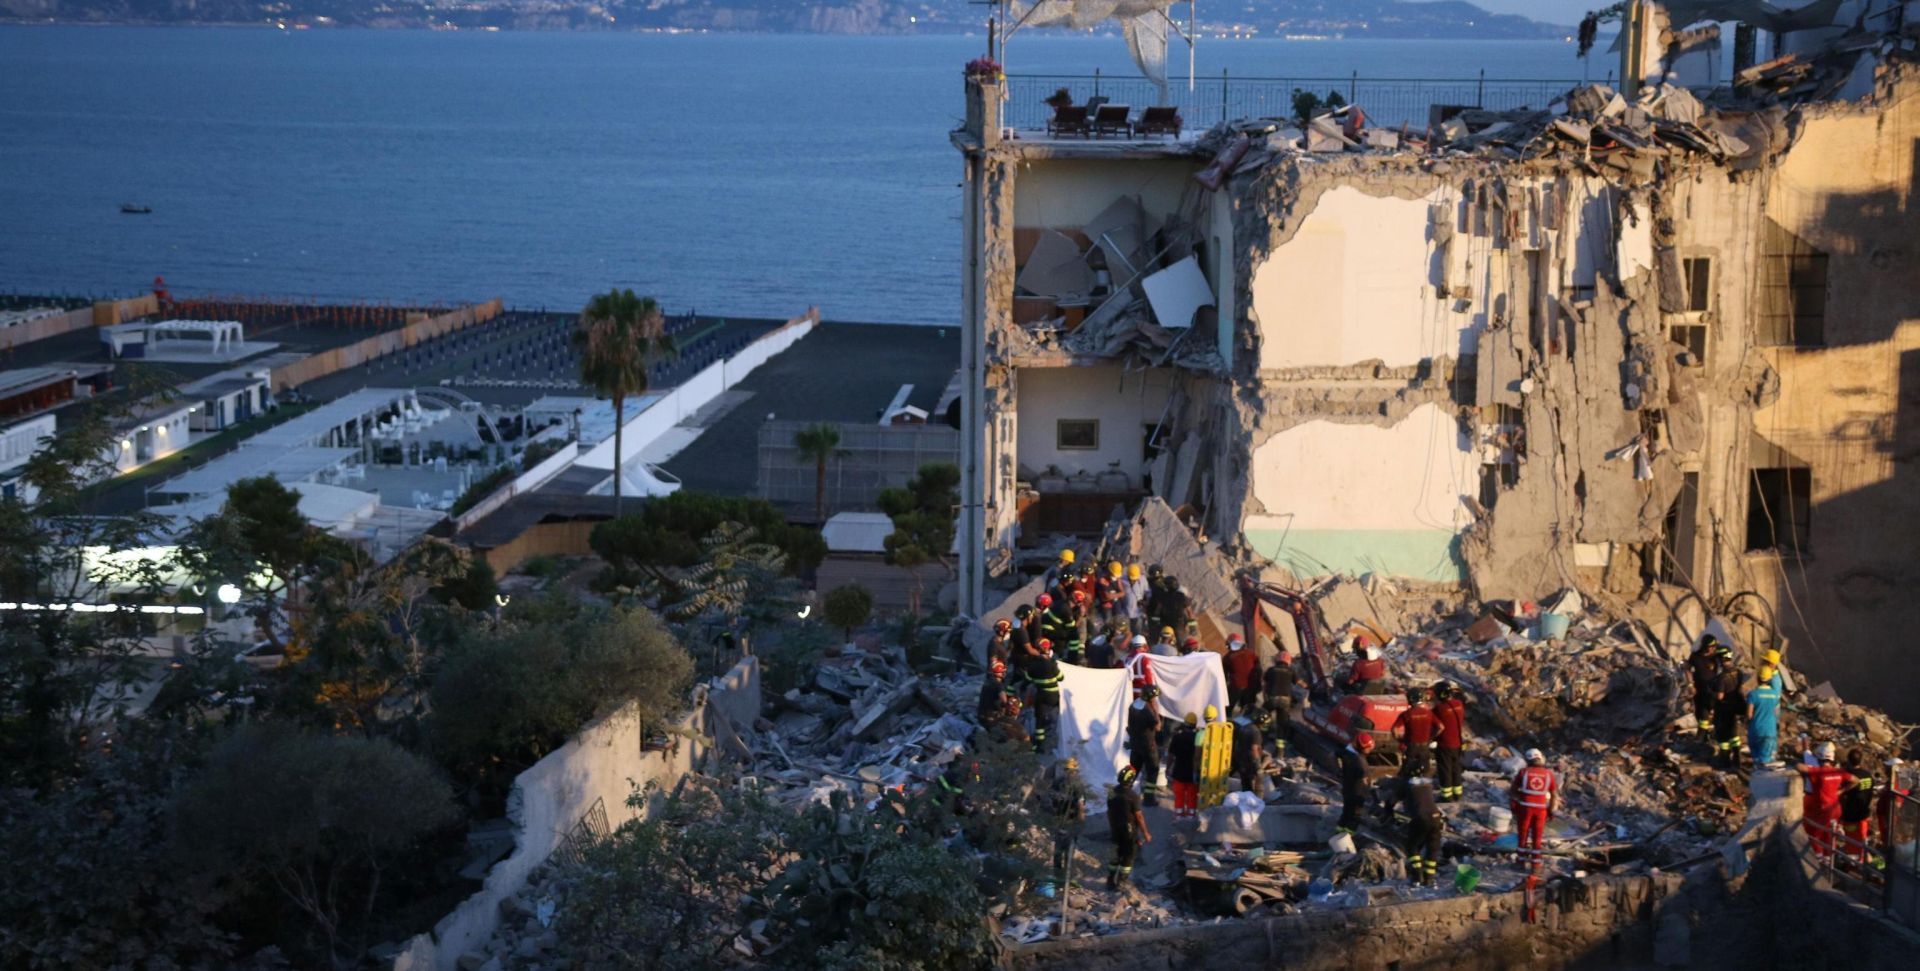 epa06074388 Rescuers at work amid the rubble of a building that collapsed in Torre Annunziata, near Naples, southern Italy, 07 July 2017. Torre Annunziata Mayor Vincenzo Ascione said seven people were missing, including two children, after an apartment building collapsed in the southern city near Naples.  EPA/CESARE ABBATE